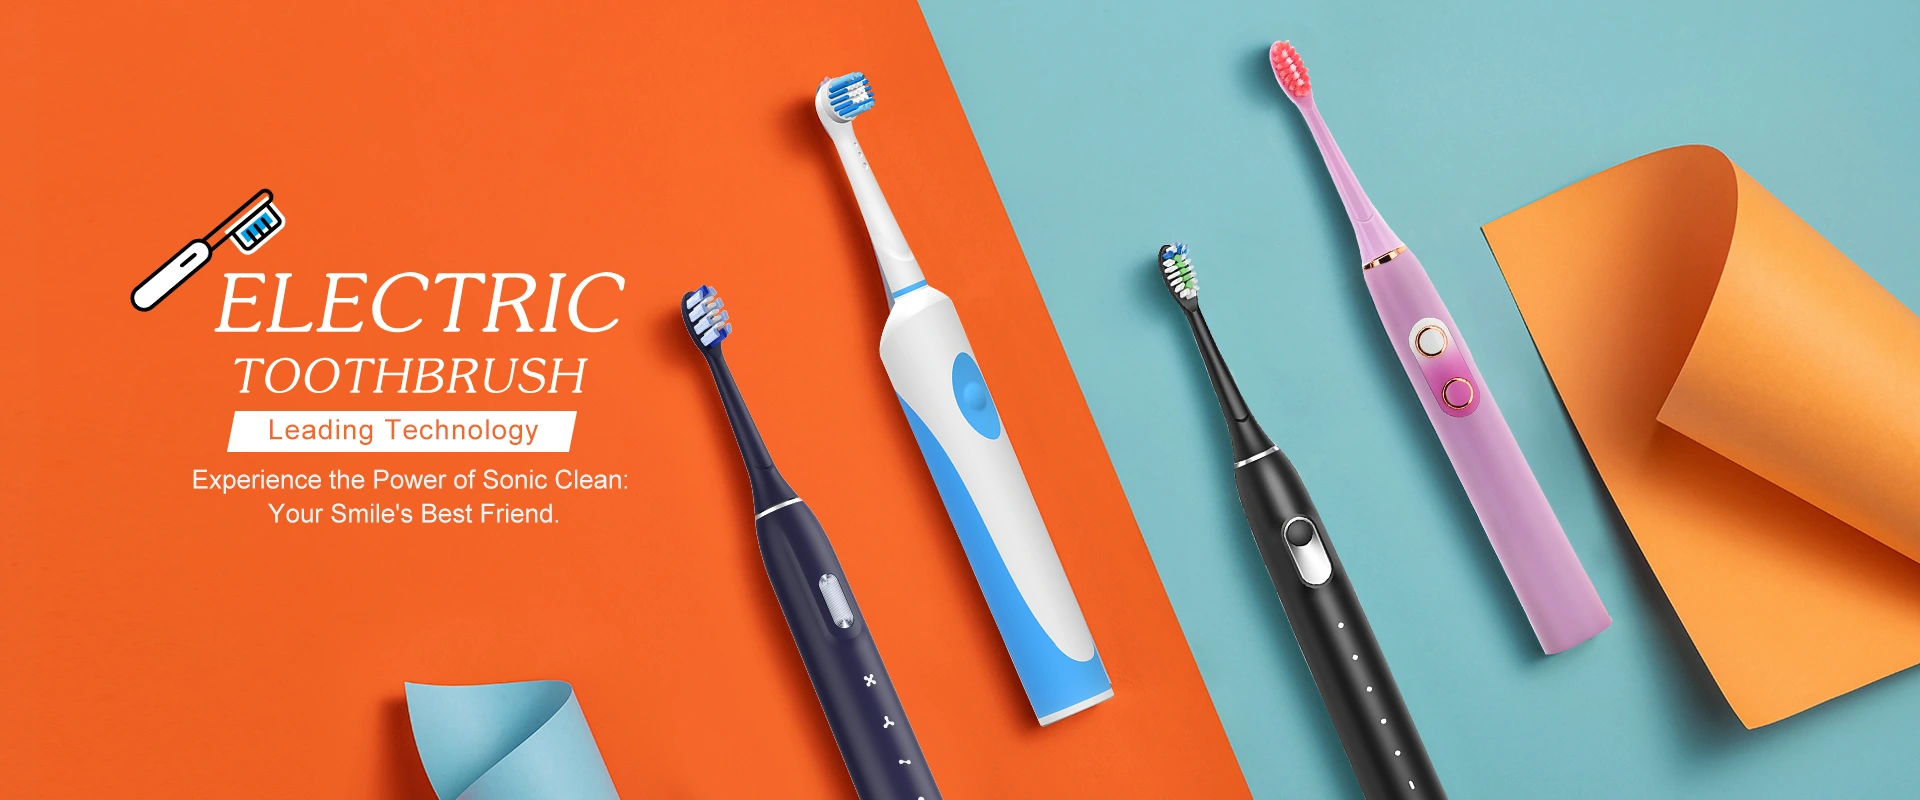 Electric Toothbrush Suppliers